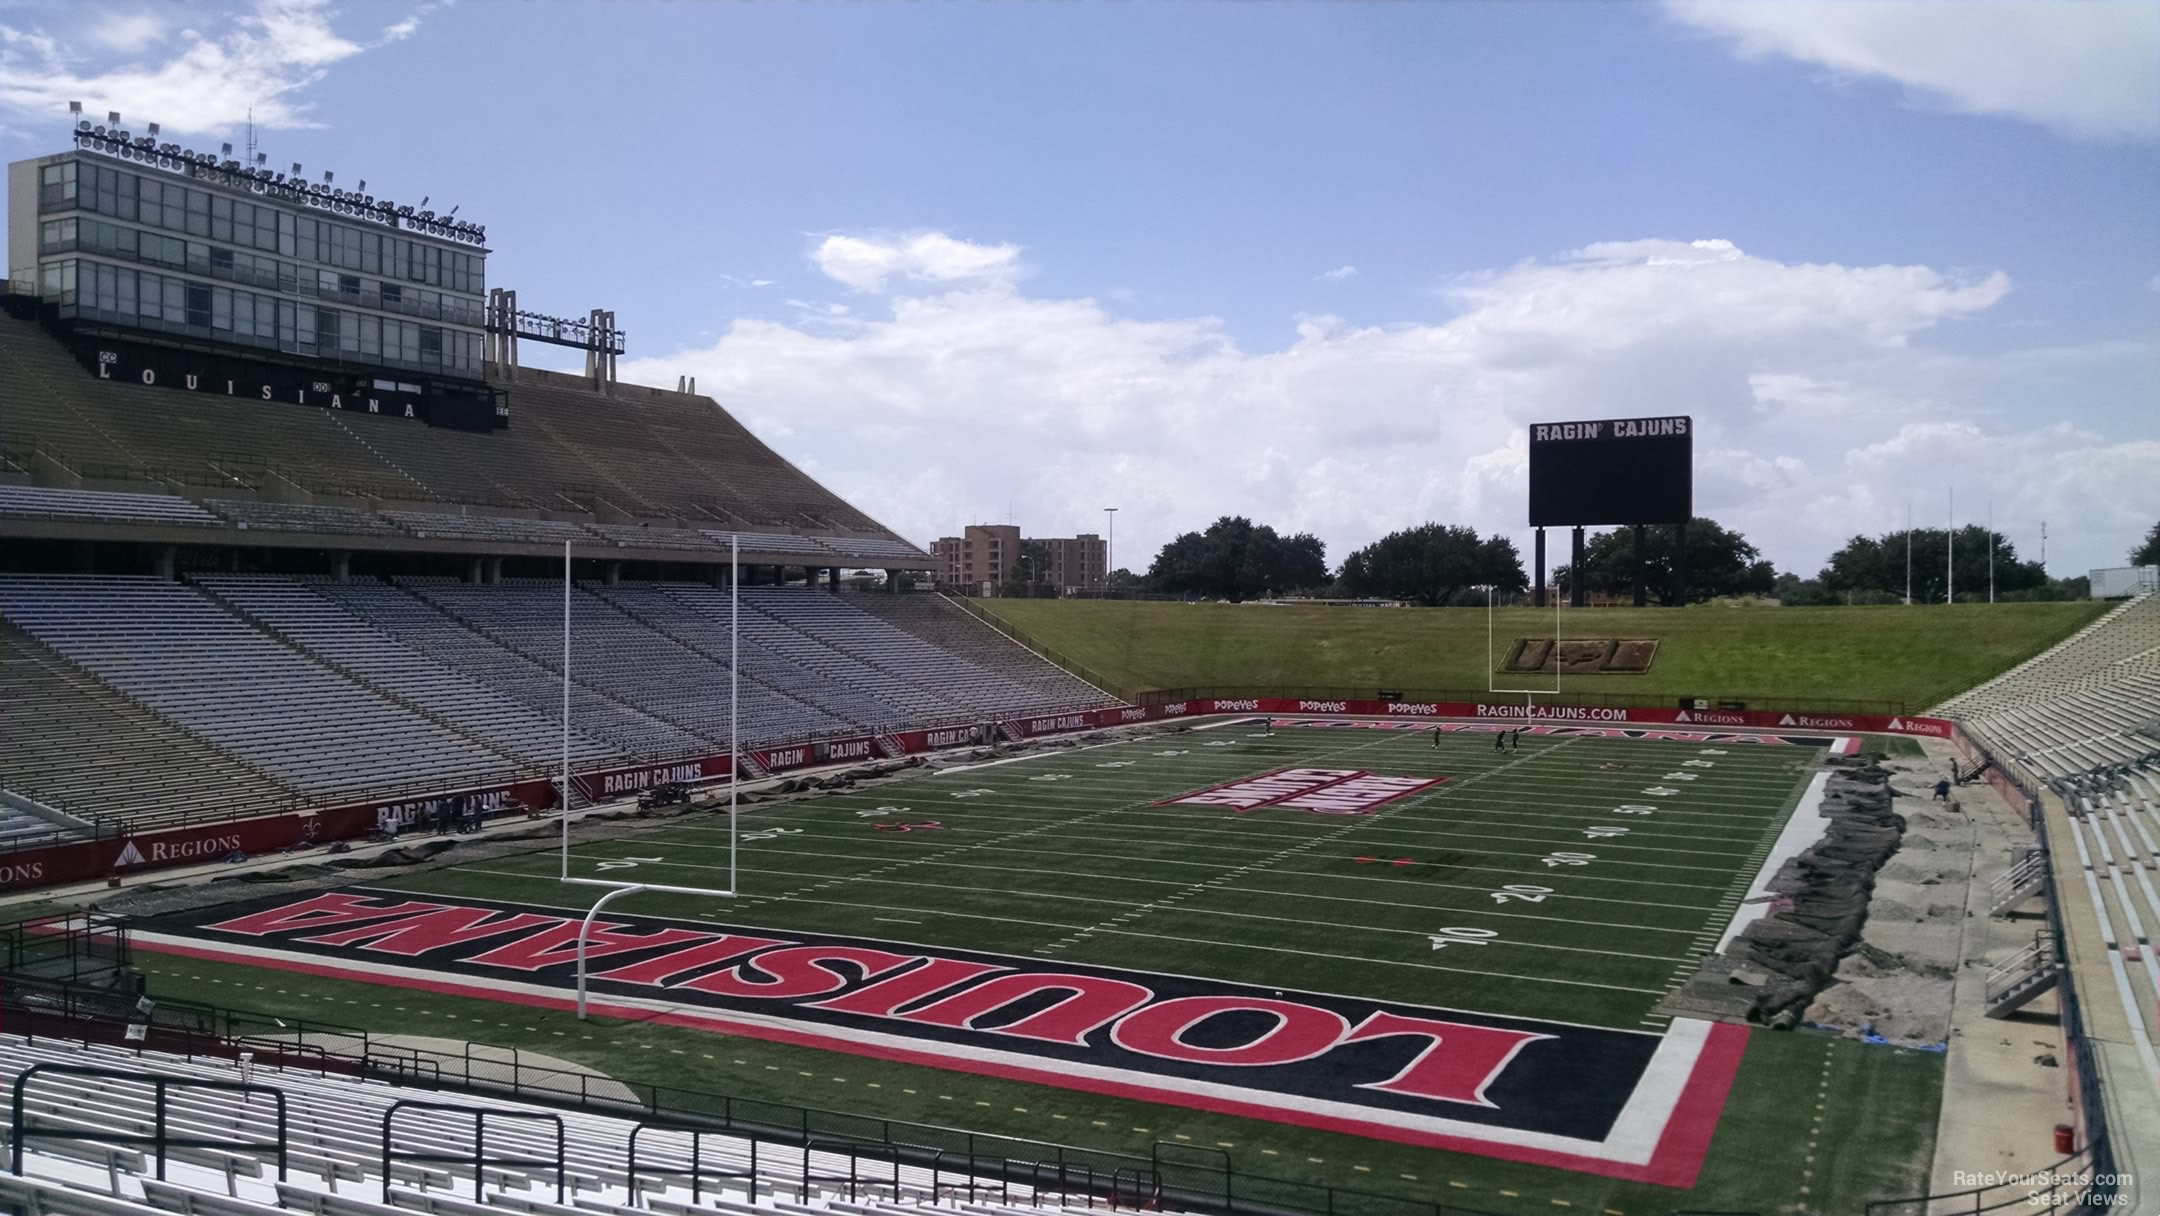 section v2, row 30 seat view  - cajun field